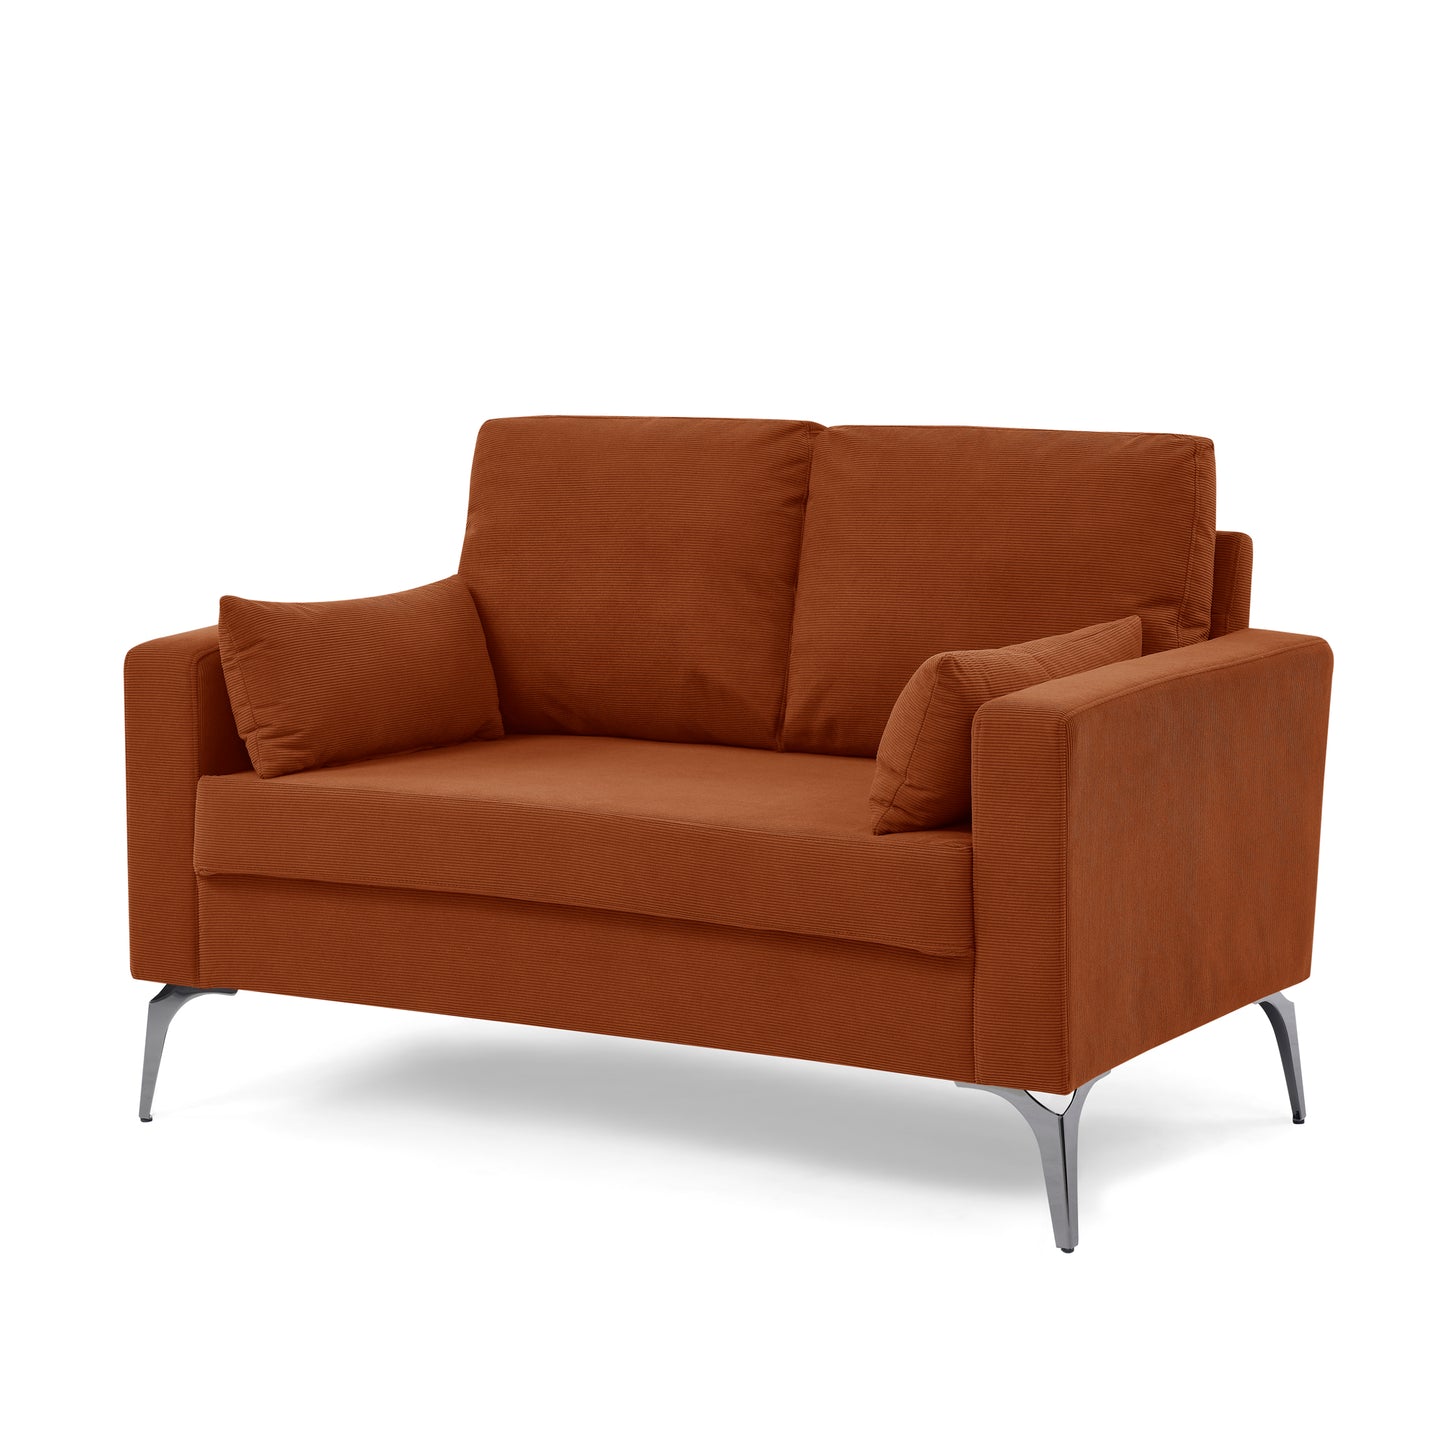 Loveseat Living Room Sofa,with Square Arms and Tight Back, with Two Small Pillows,Corduroy Orange